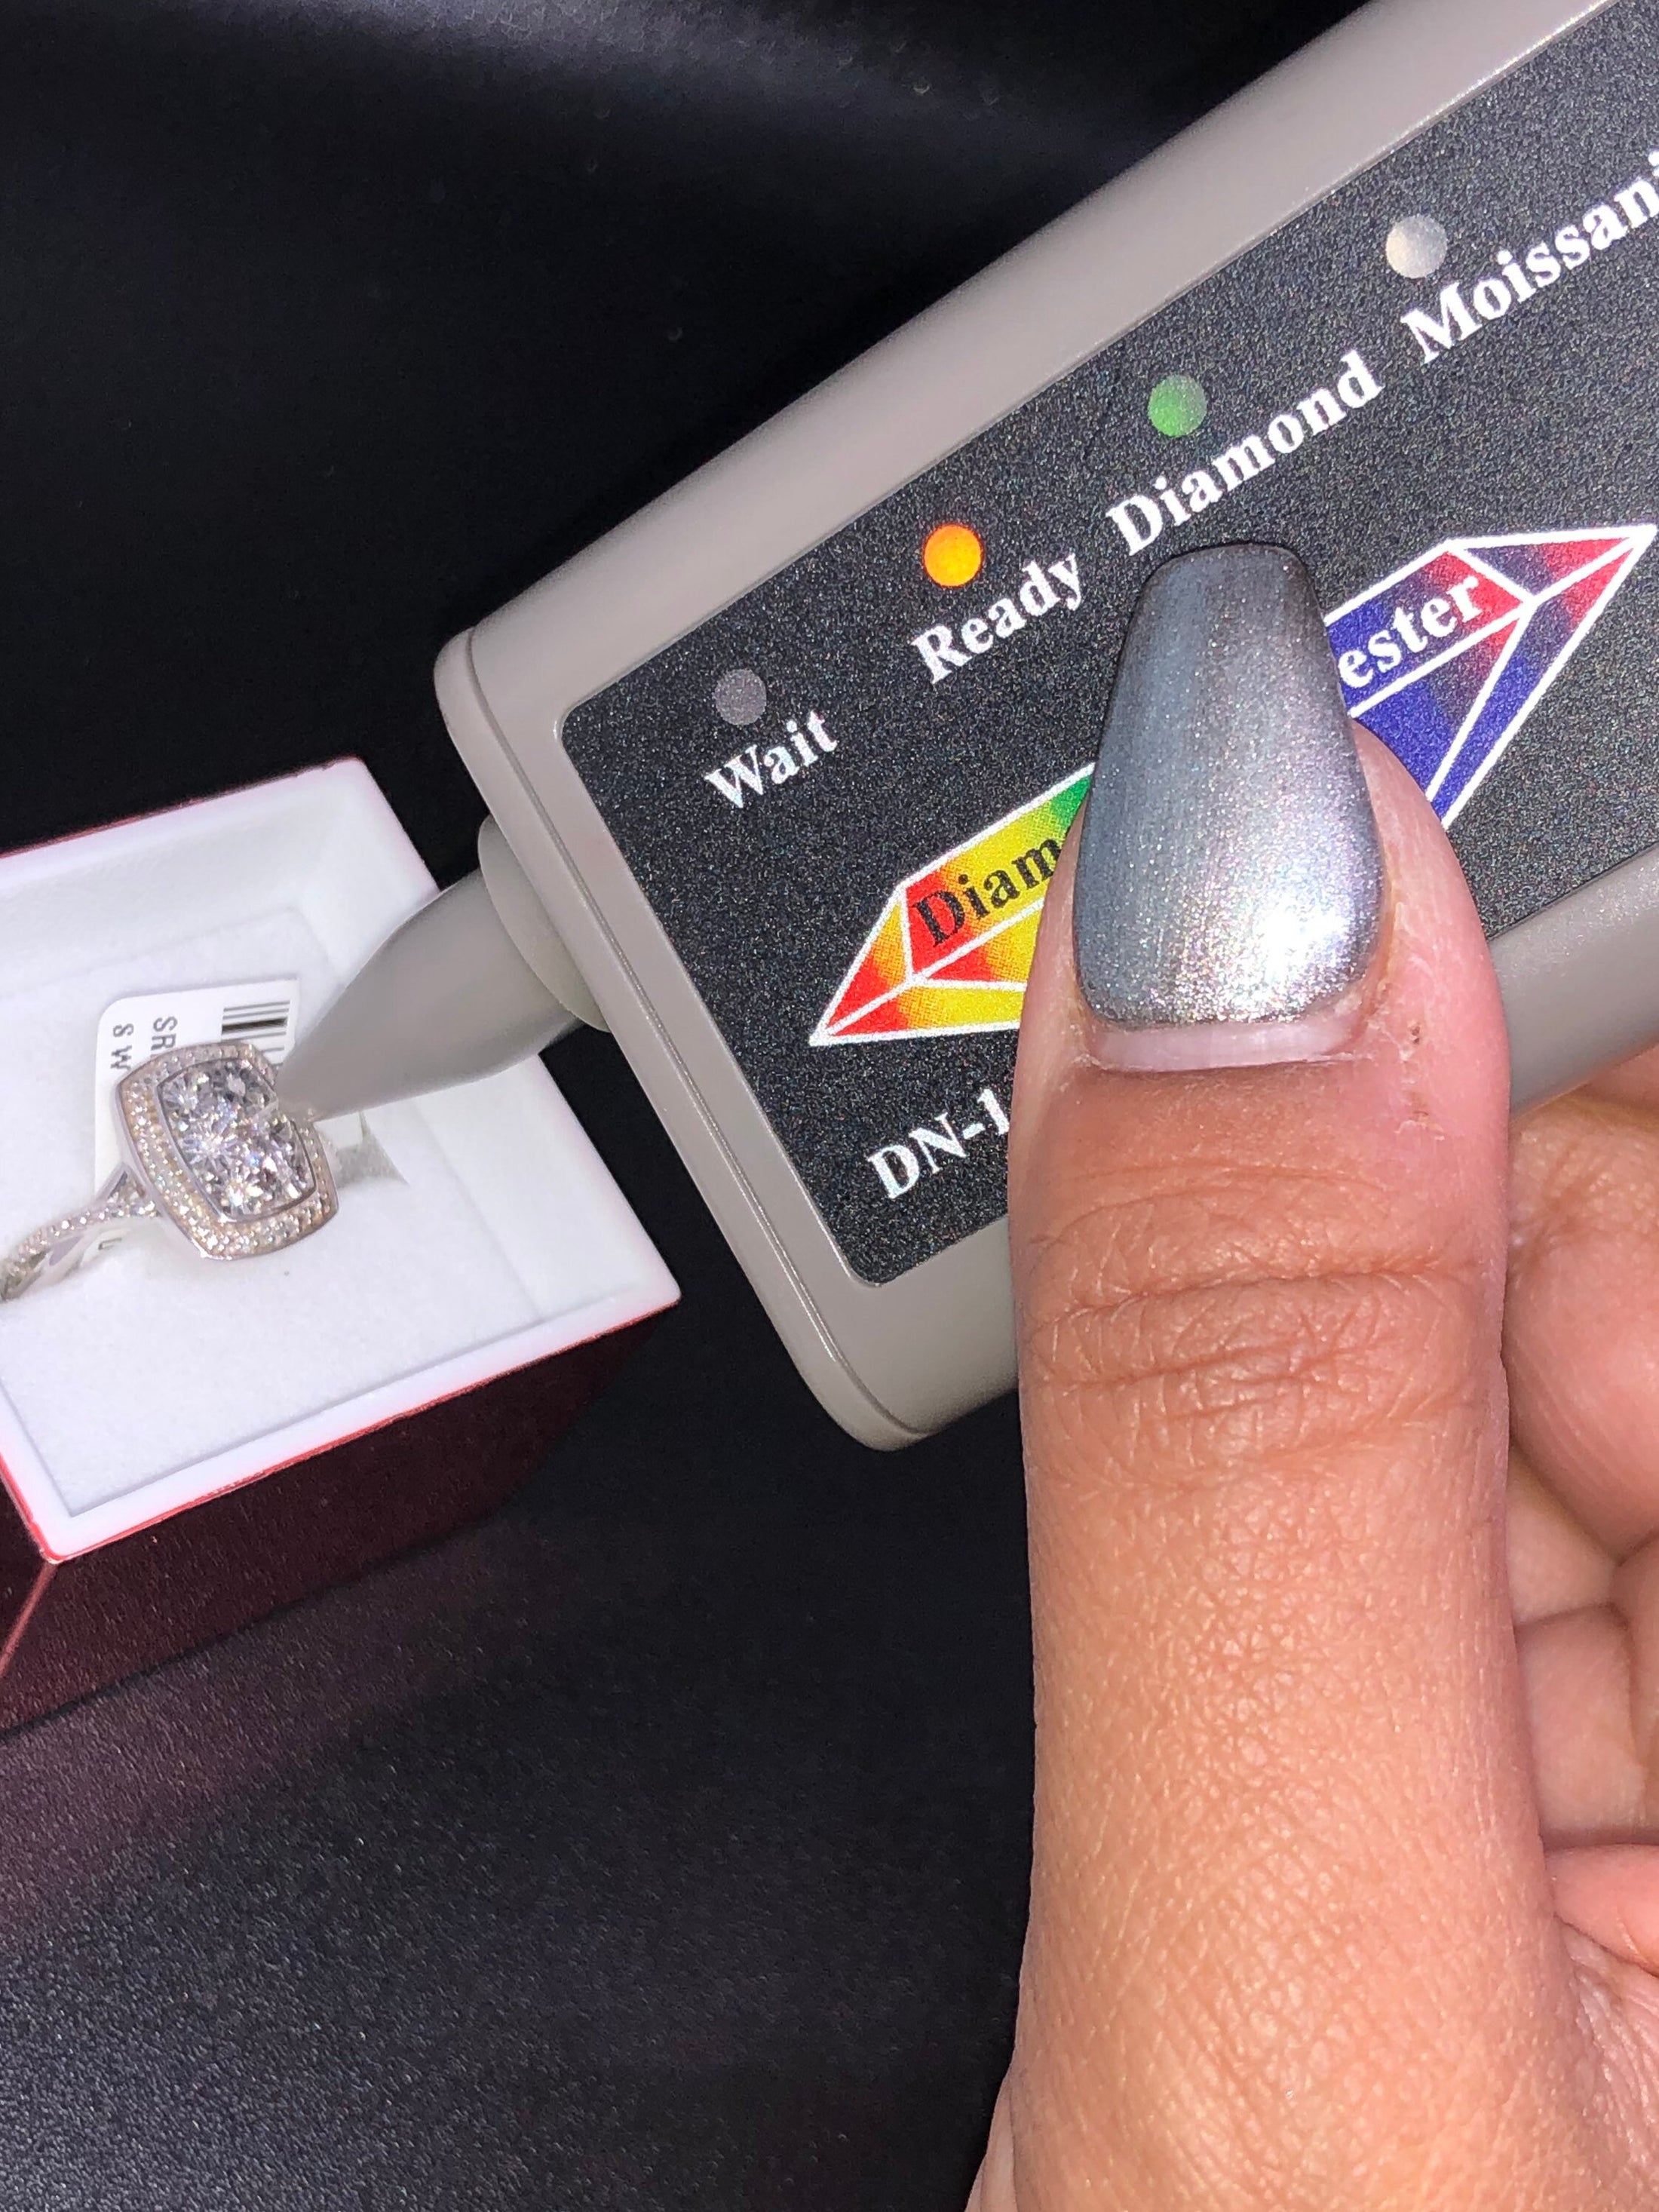 Real diamond engagement promise ring a beautiful Christmas occasions not CZ not moissanite all natural diamonds authenticity card incl…